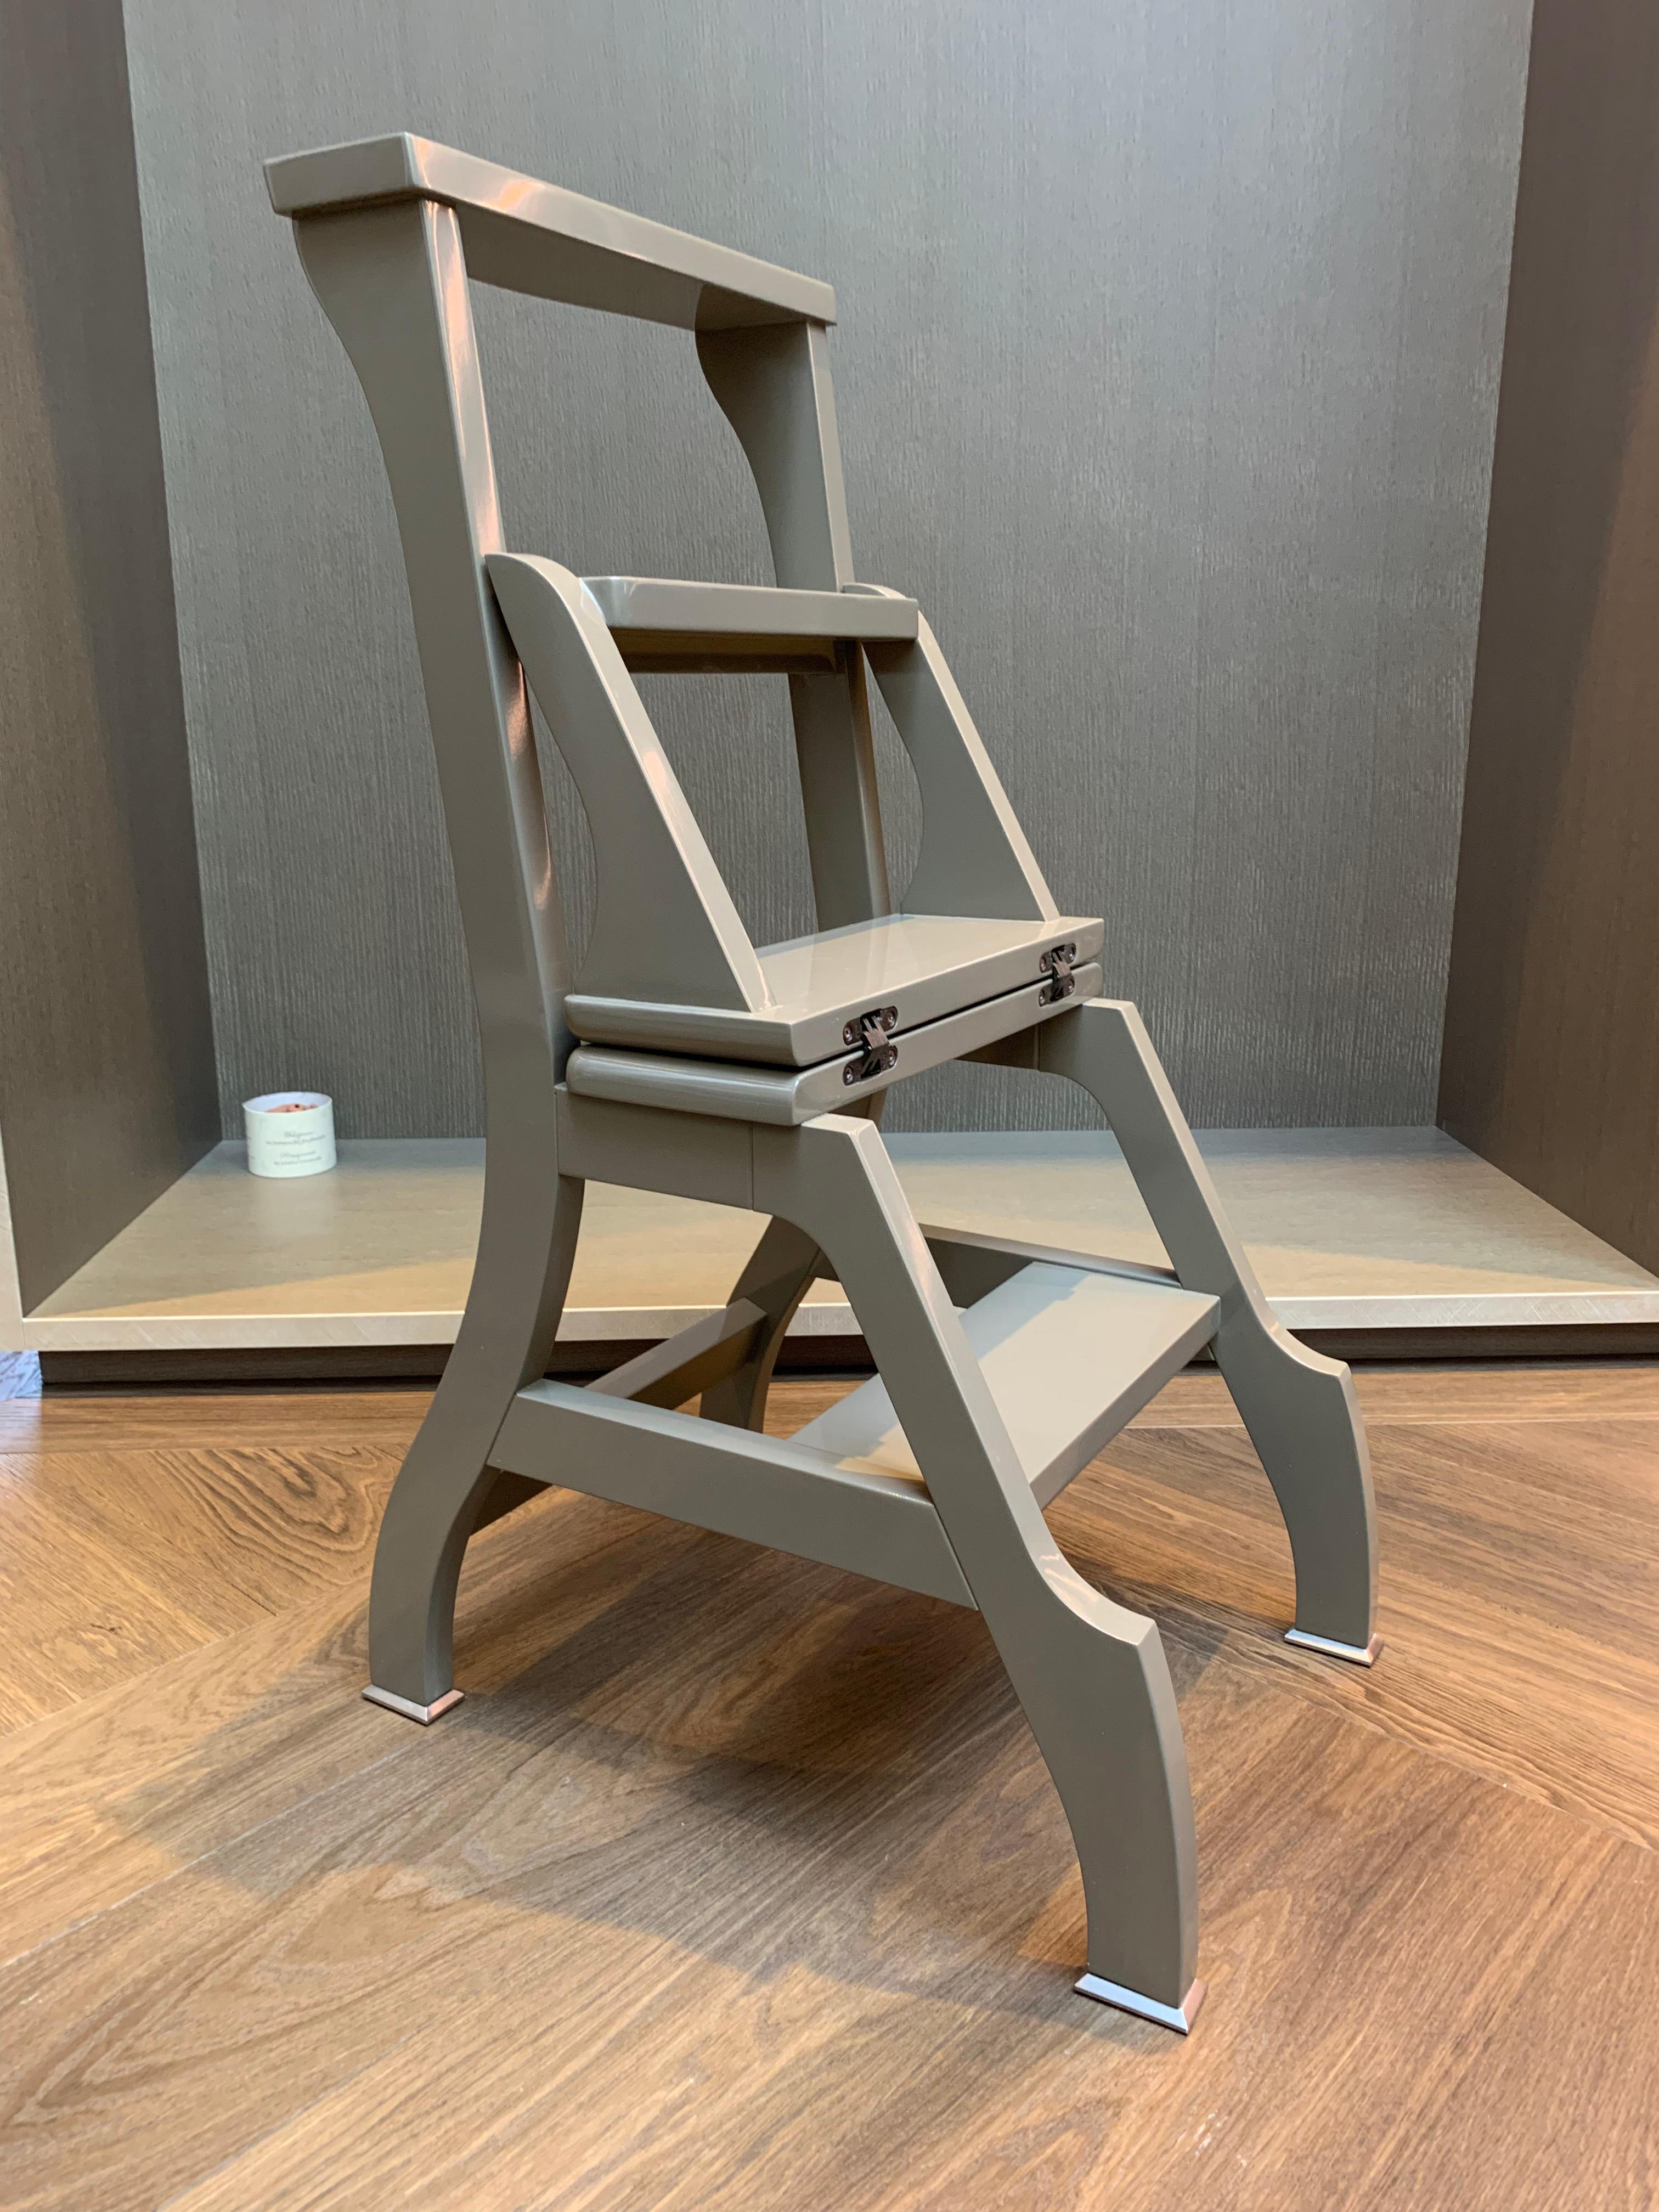 Other Contemporary, Grey Lacquered, Beechwood, Ladder Chair by Promemoria